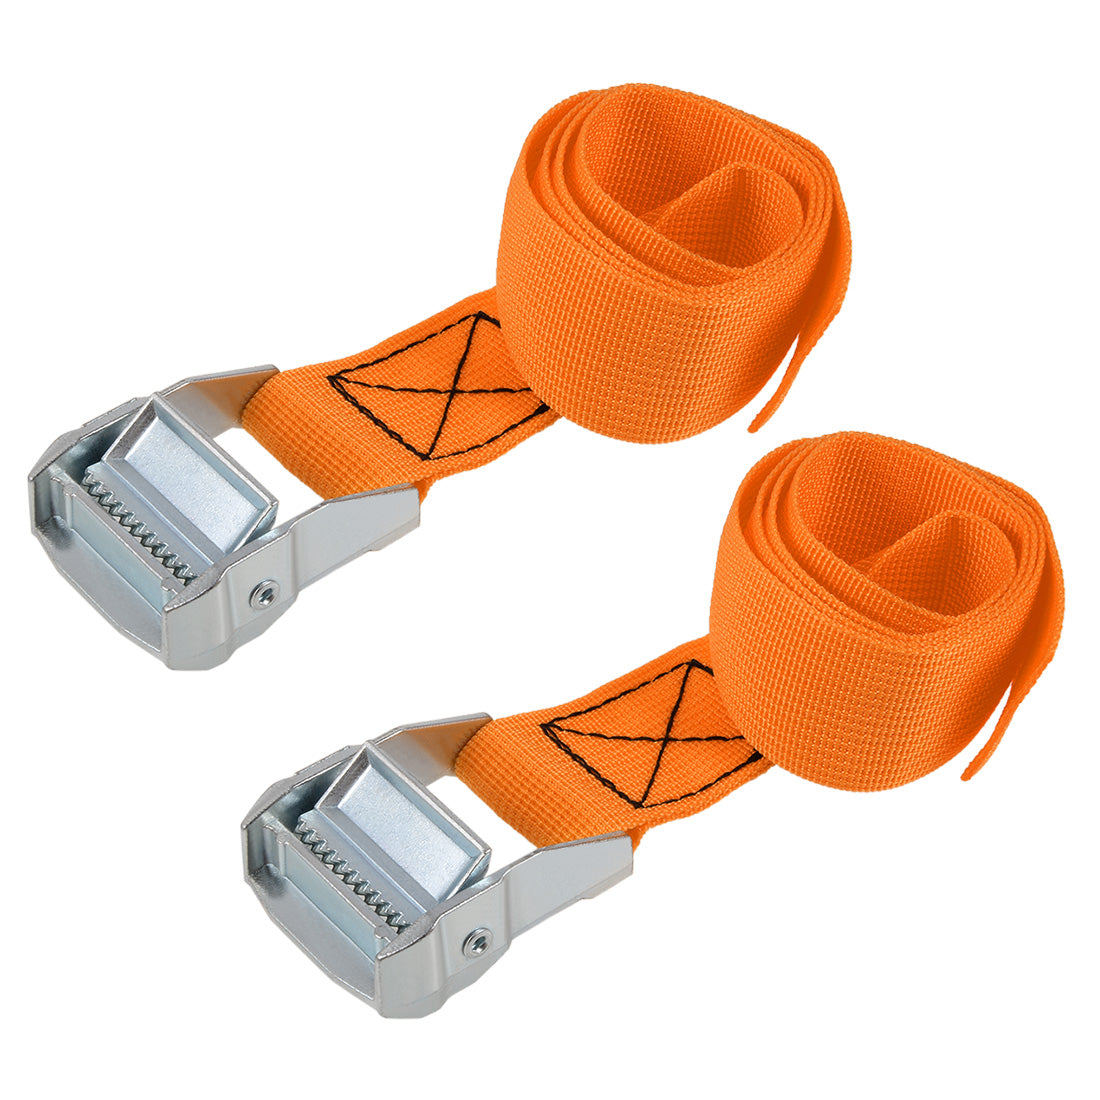 uxcell Uxcell Lashing Strap 1.5" x 2.6' Cargo Tie Down Straps with Cam Lock Buckle Up to 1100lbs Orange 2Pcs